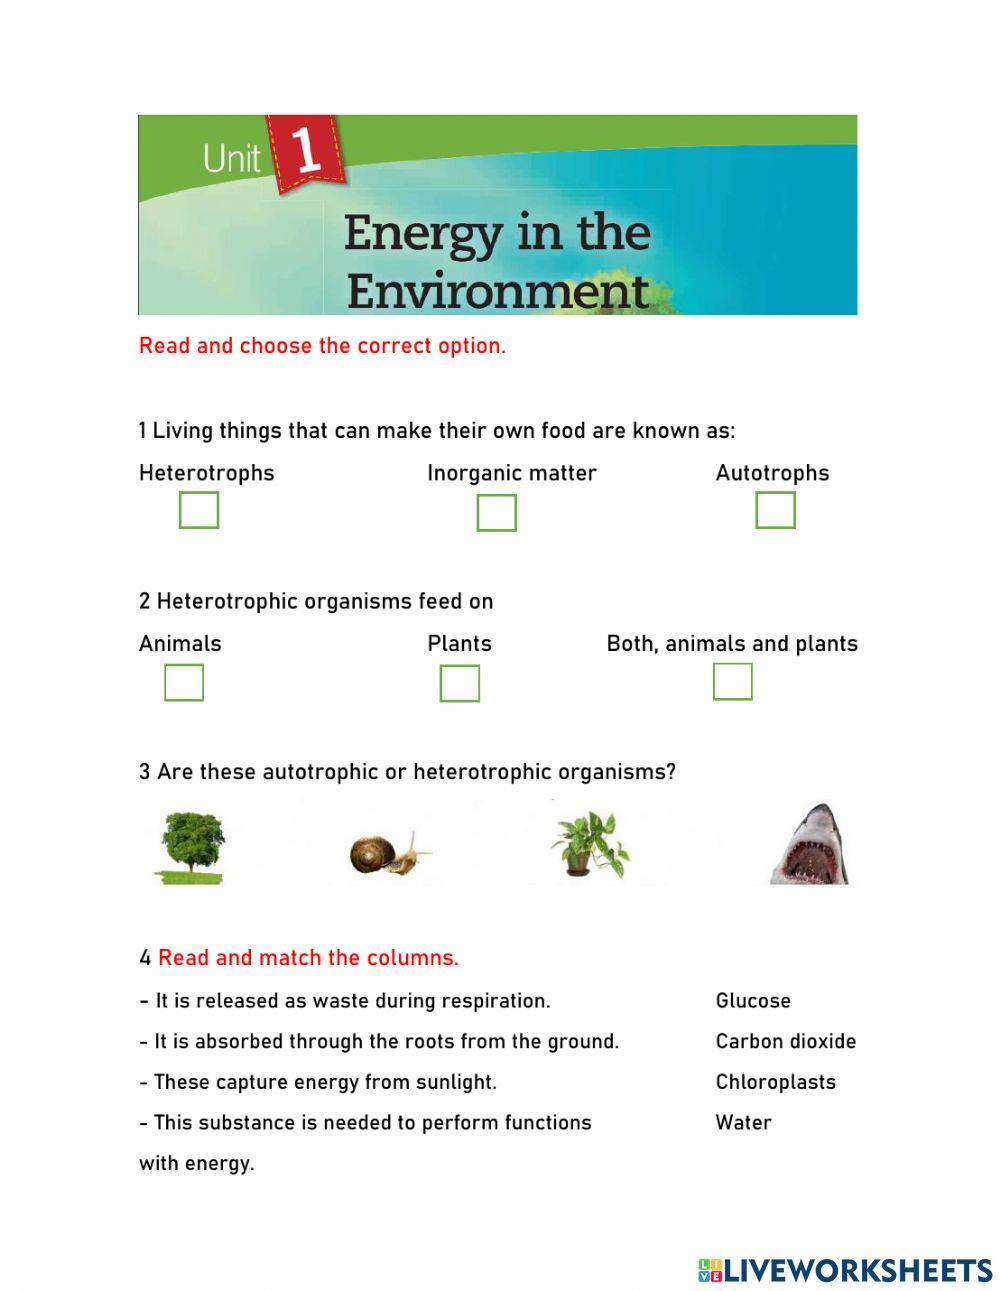 Energy in the environment